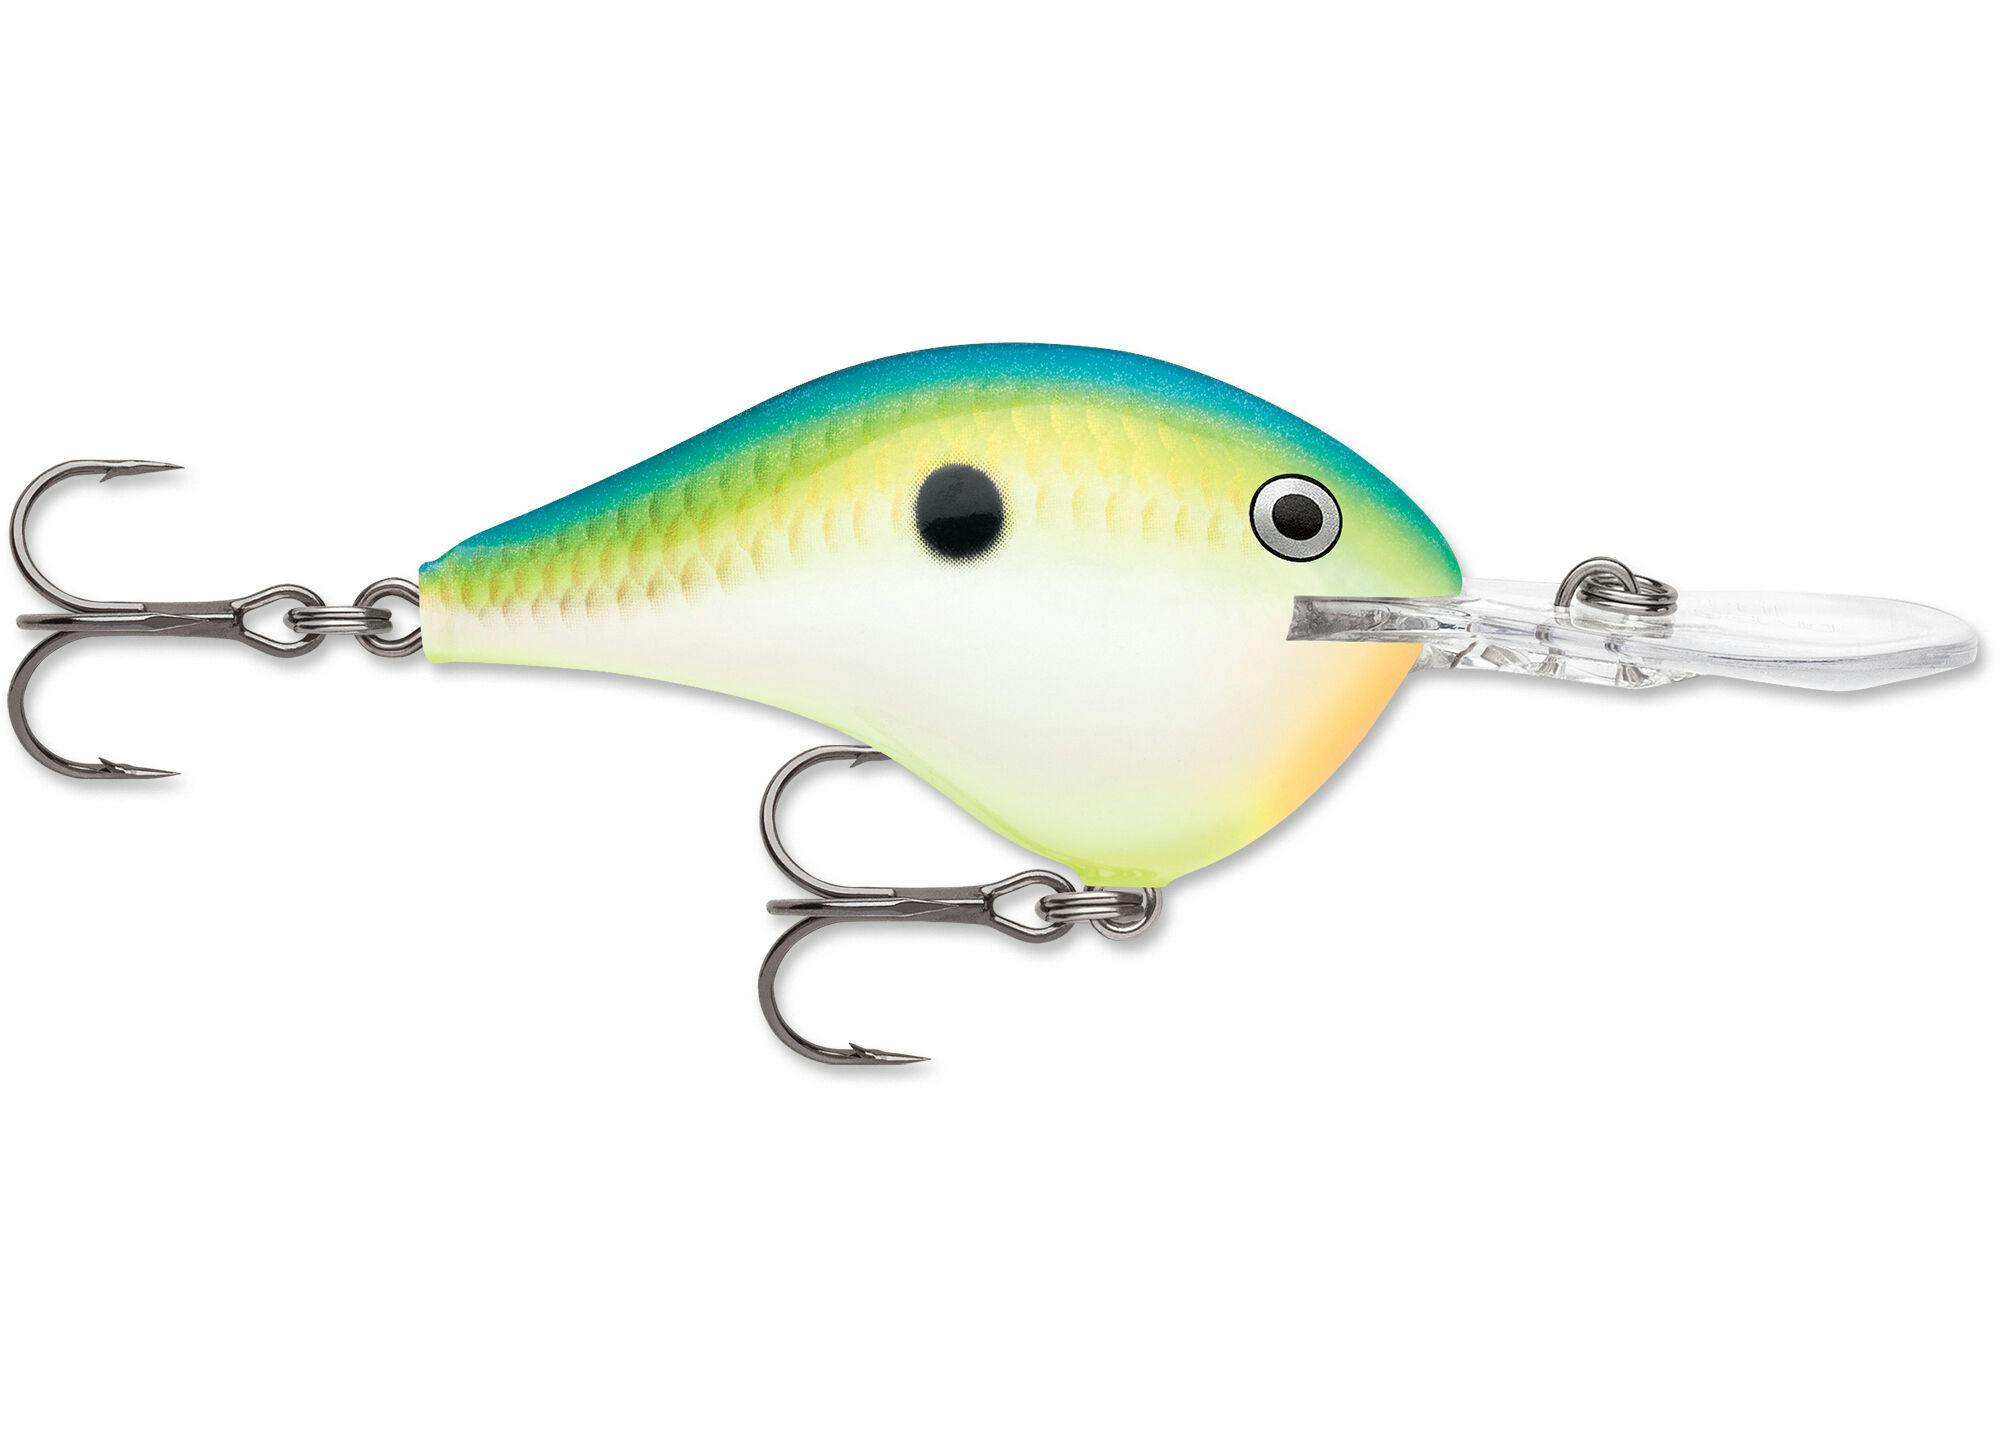 Rapala DT® (Dives-To) Series · 2-3/4 in · 3/4 oz · Citrus Shad · 1 pk.